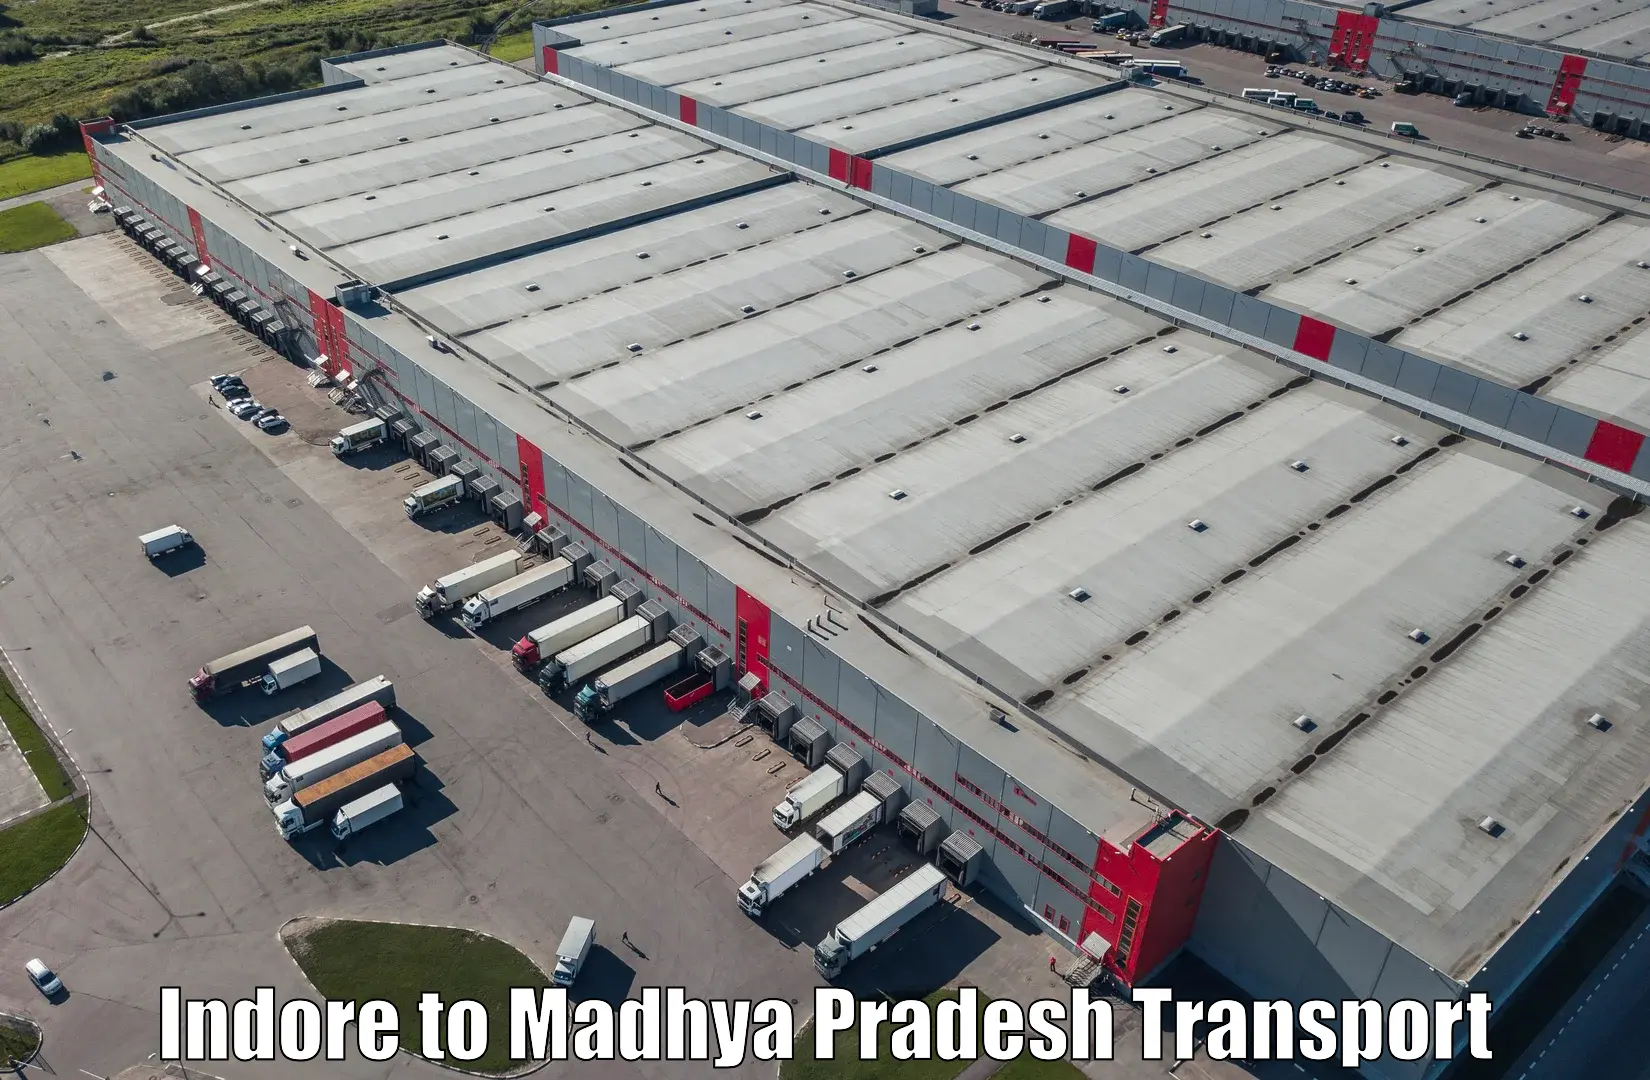 Express transport services Indore to Mandideep